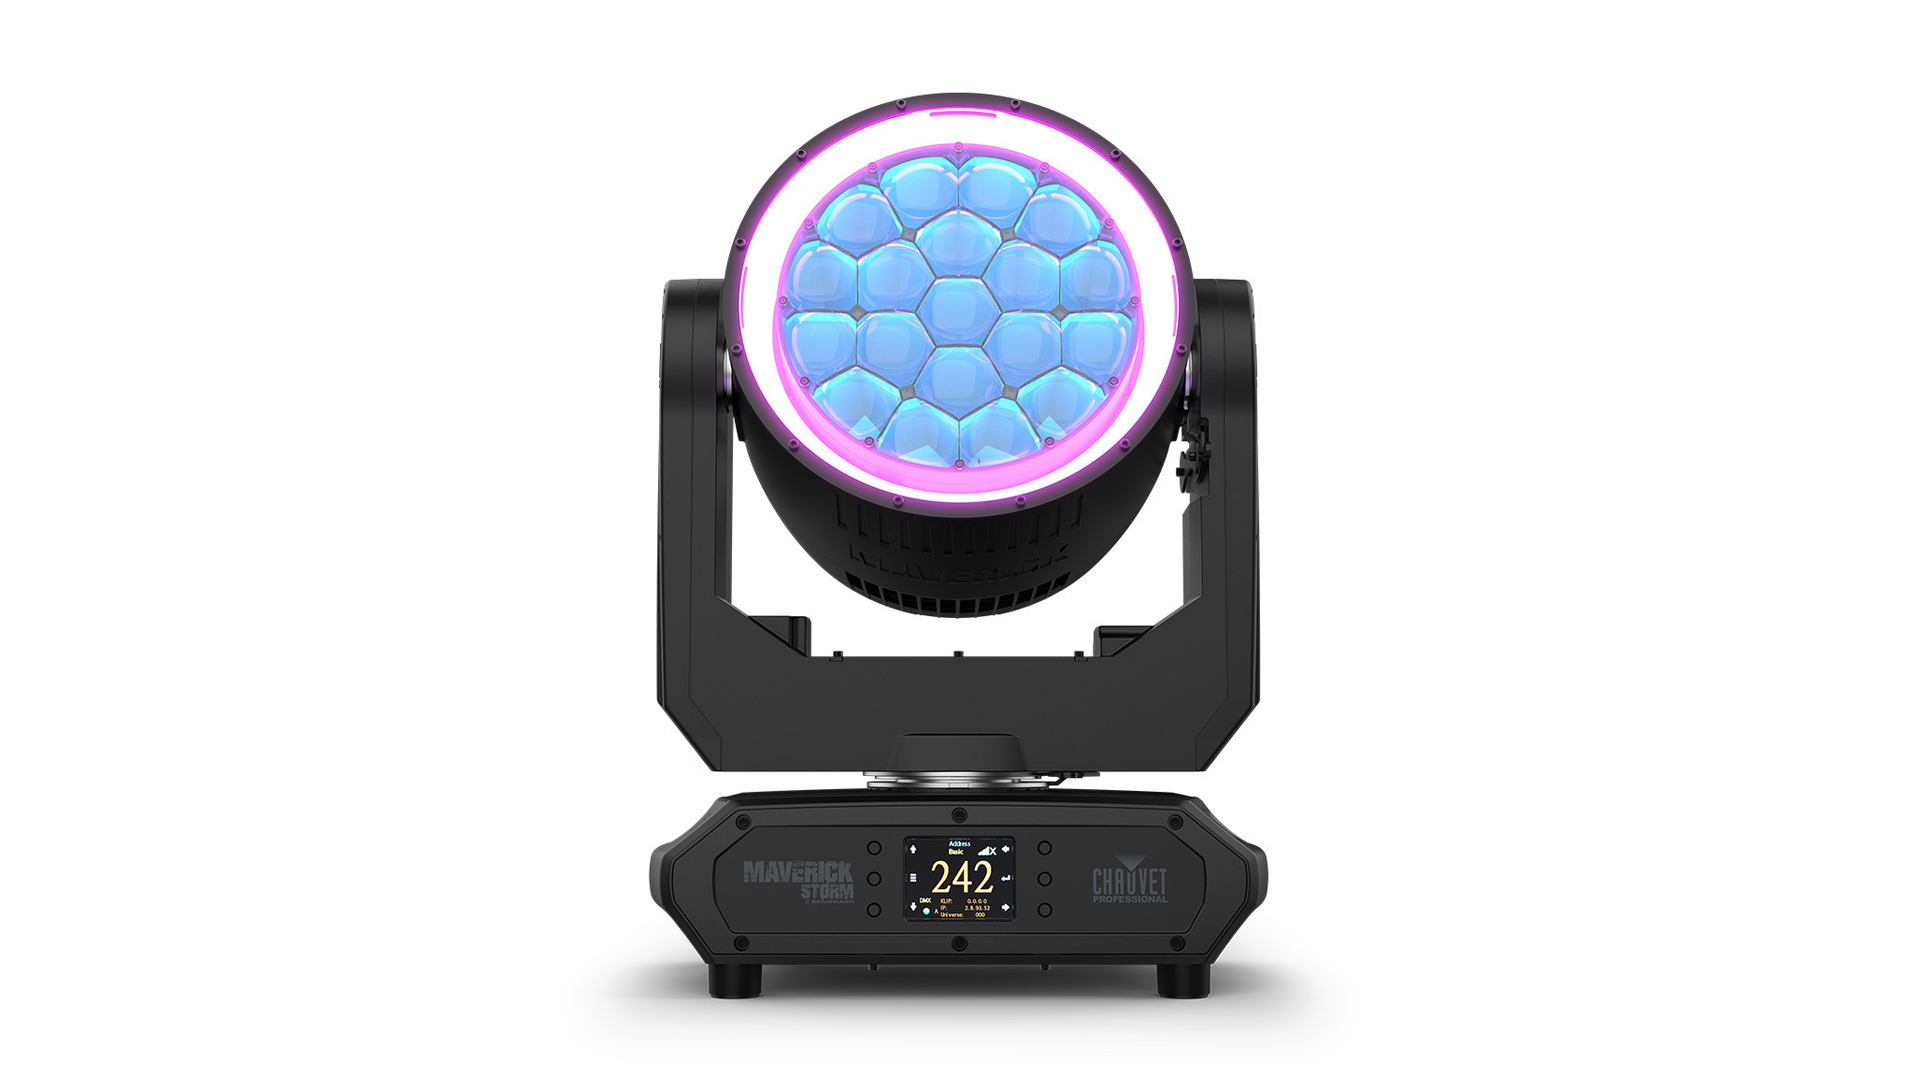 Hire Chauvet Maverick Storm 2 BeamWash IP rated outdoor LED moving head in Cardiff, Newport, Swansea, Carmarthenshire, Pembrokeshire & South West Wales